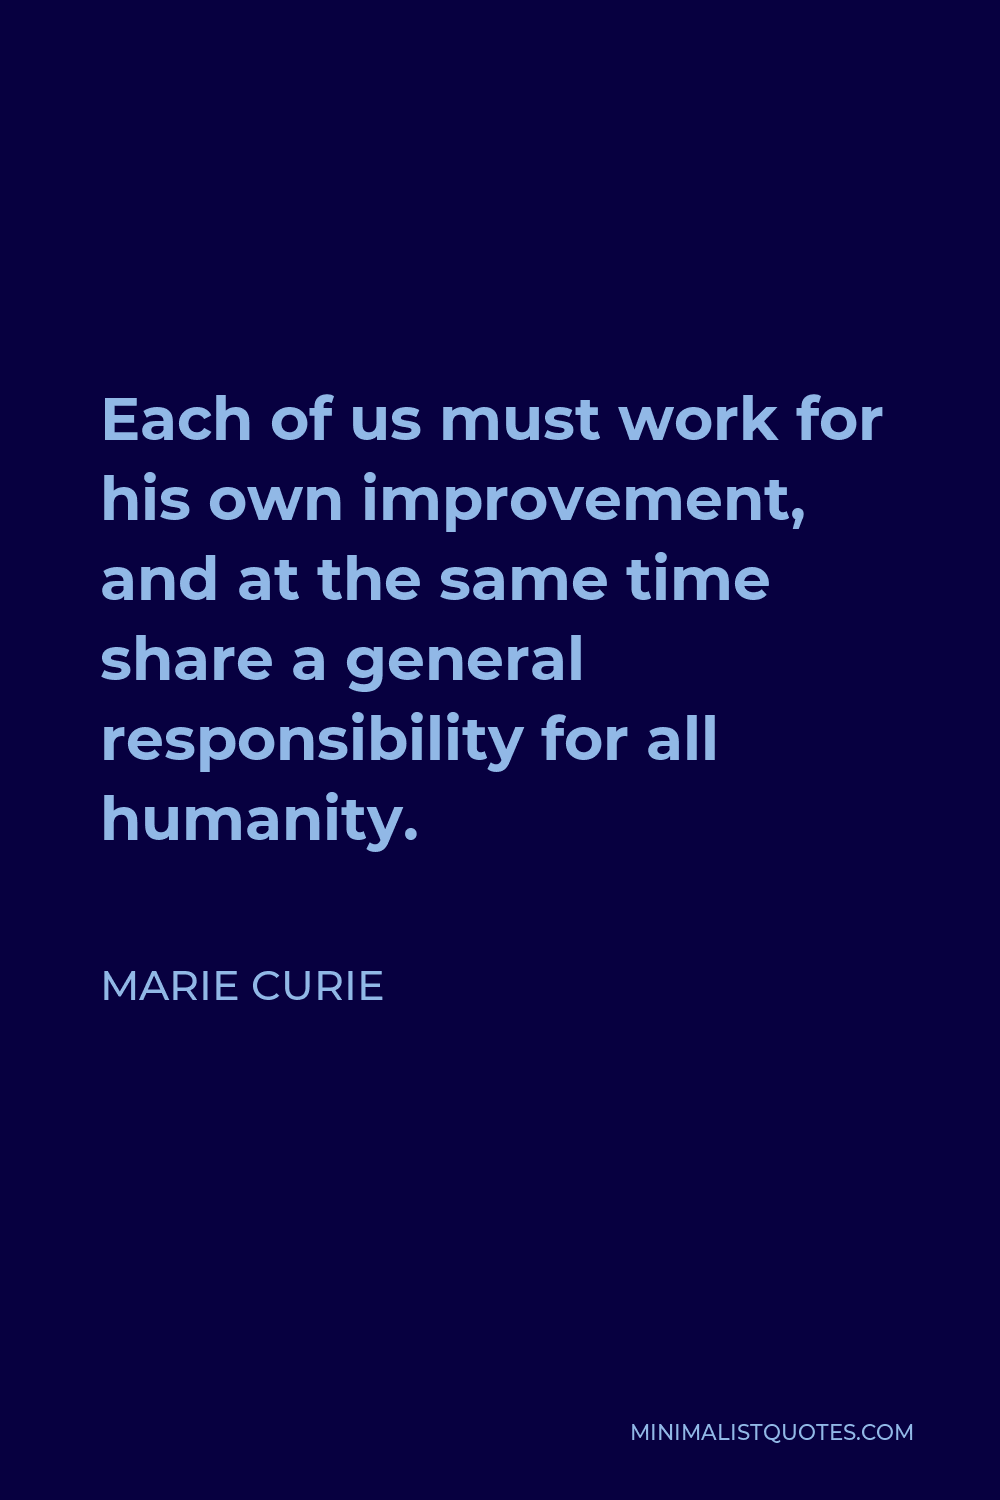 Marie Curie Quote - Each of us must work for his own improvement, and at the same time share a general responsibility for all humanity.